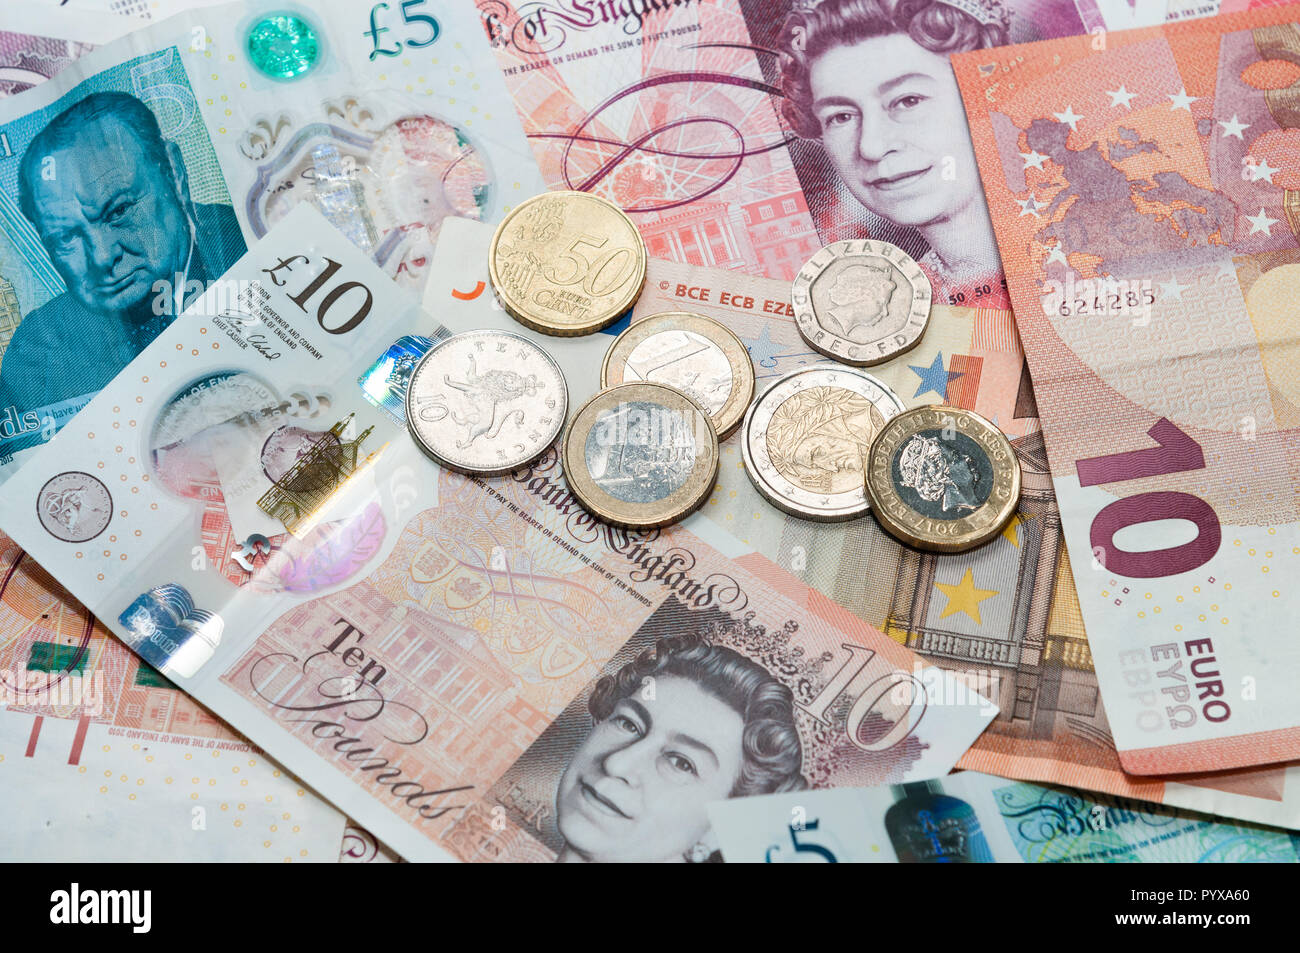 UK and EU money currency Stock Photo